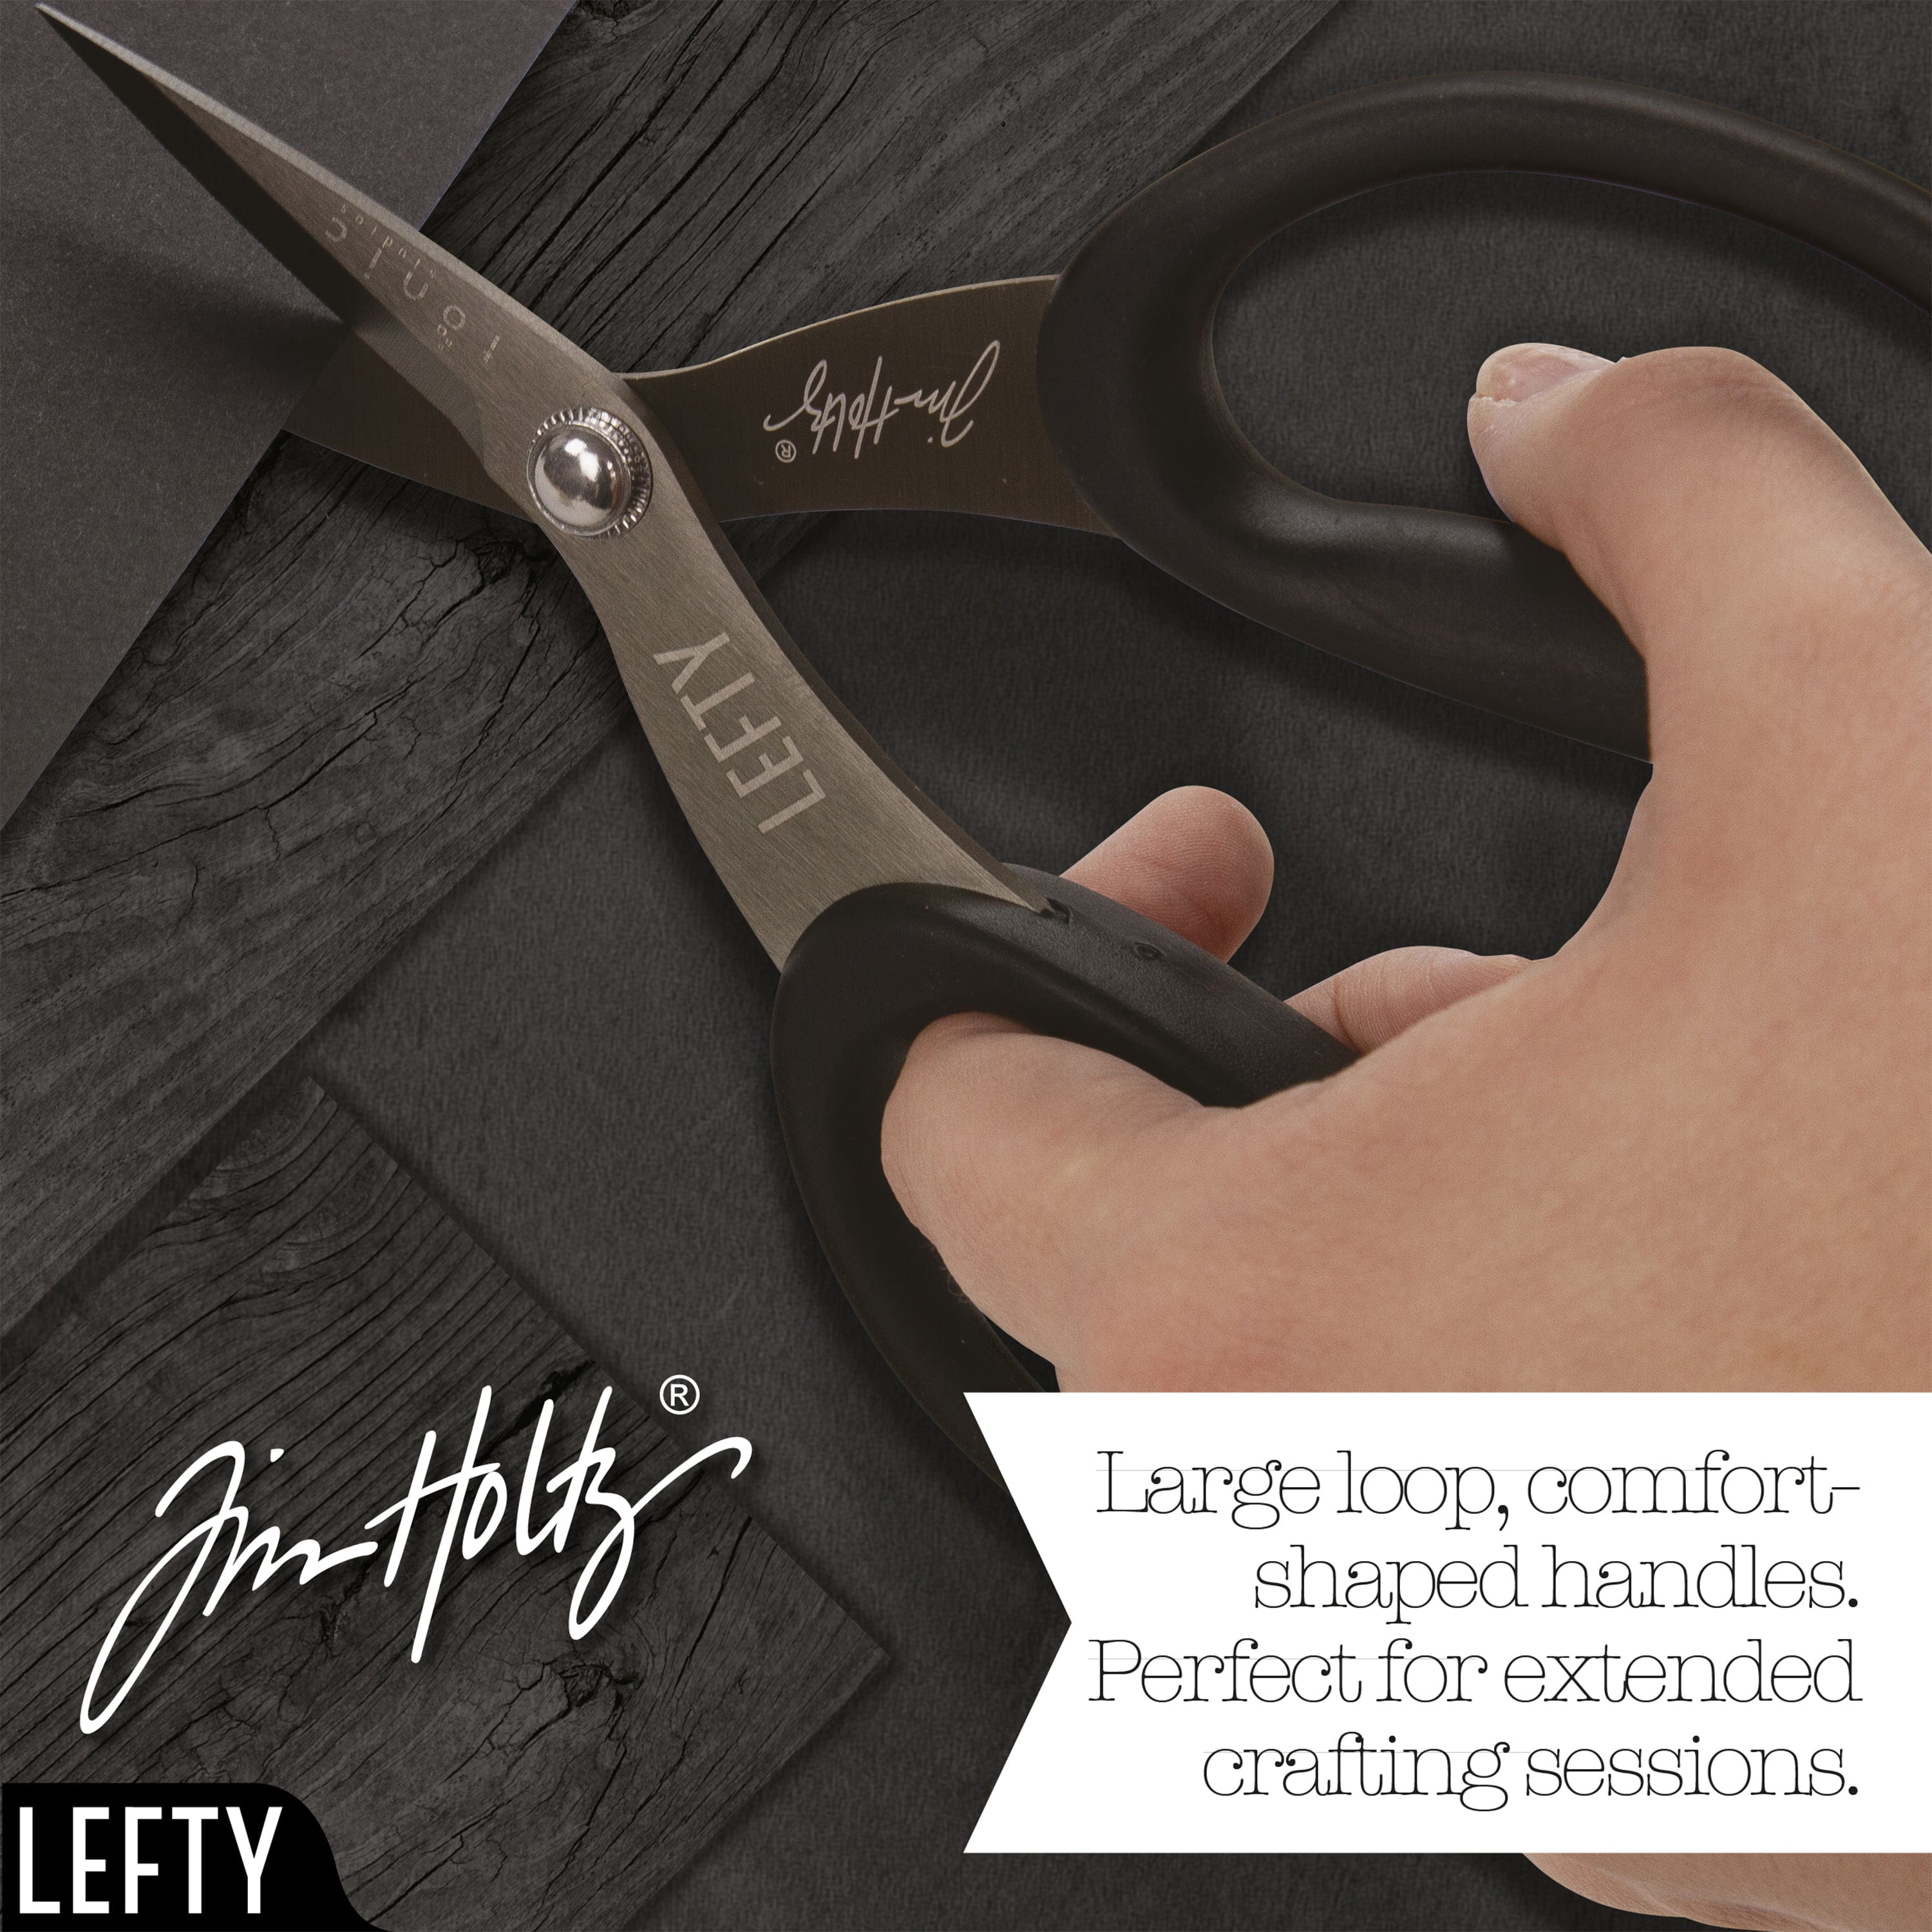  Tonic Studios Left Handed Scissors - All Purpose Heavy Duty  Snips with Titanium Coating - Lefty Craft Tool for Fabric, Cardstock, and  Vinyl - 8.5 Inch Shears